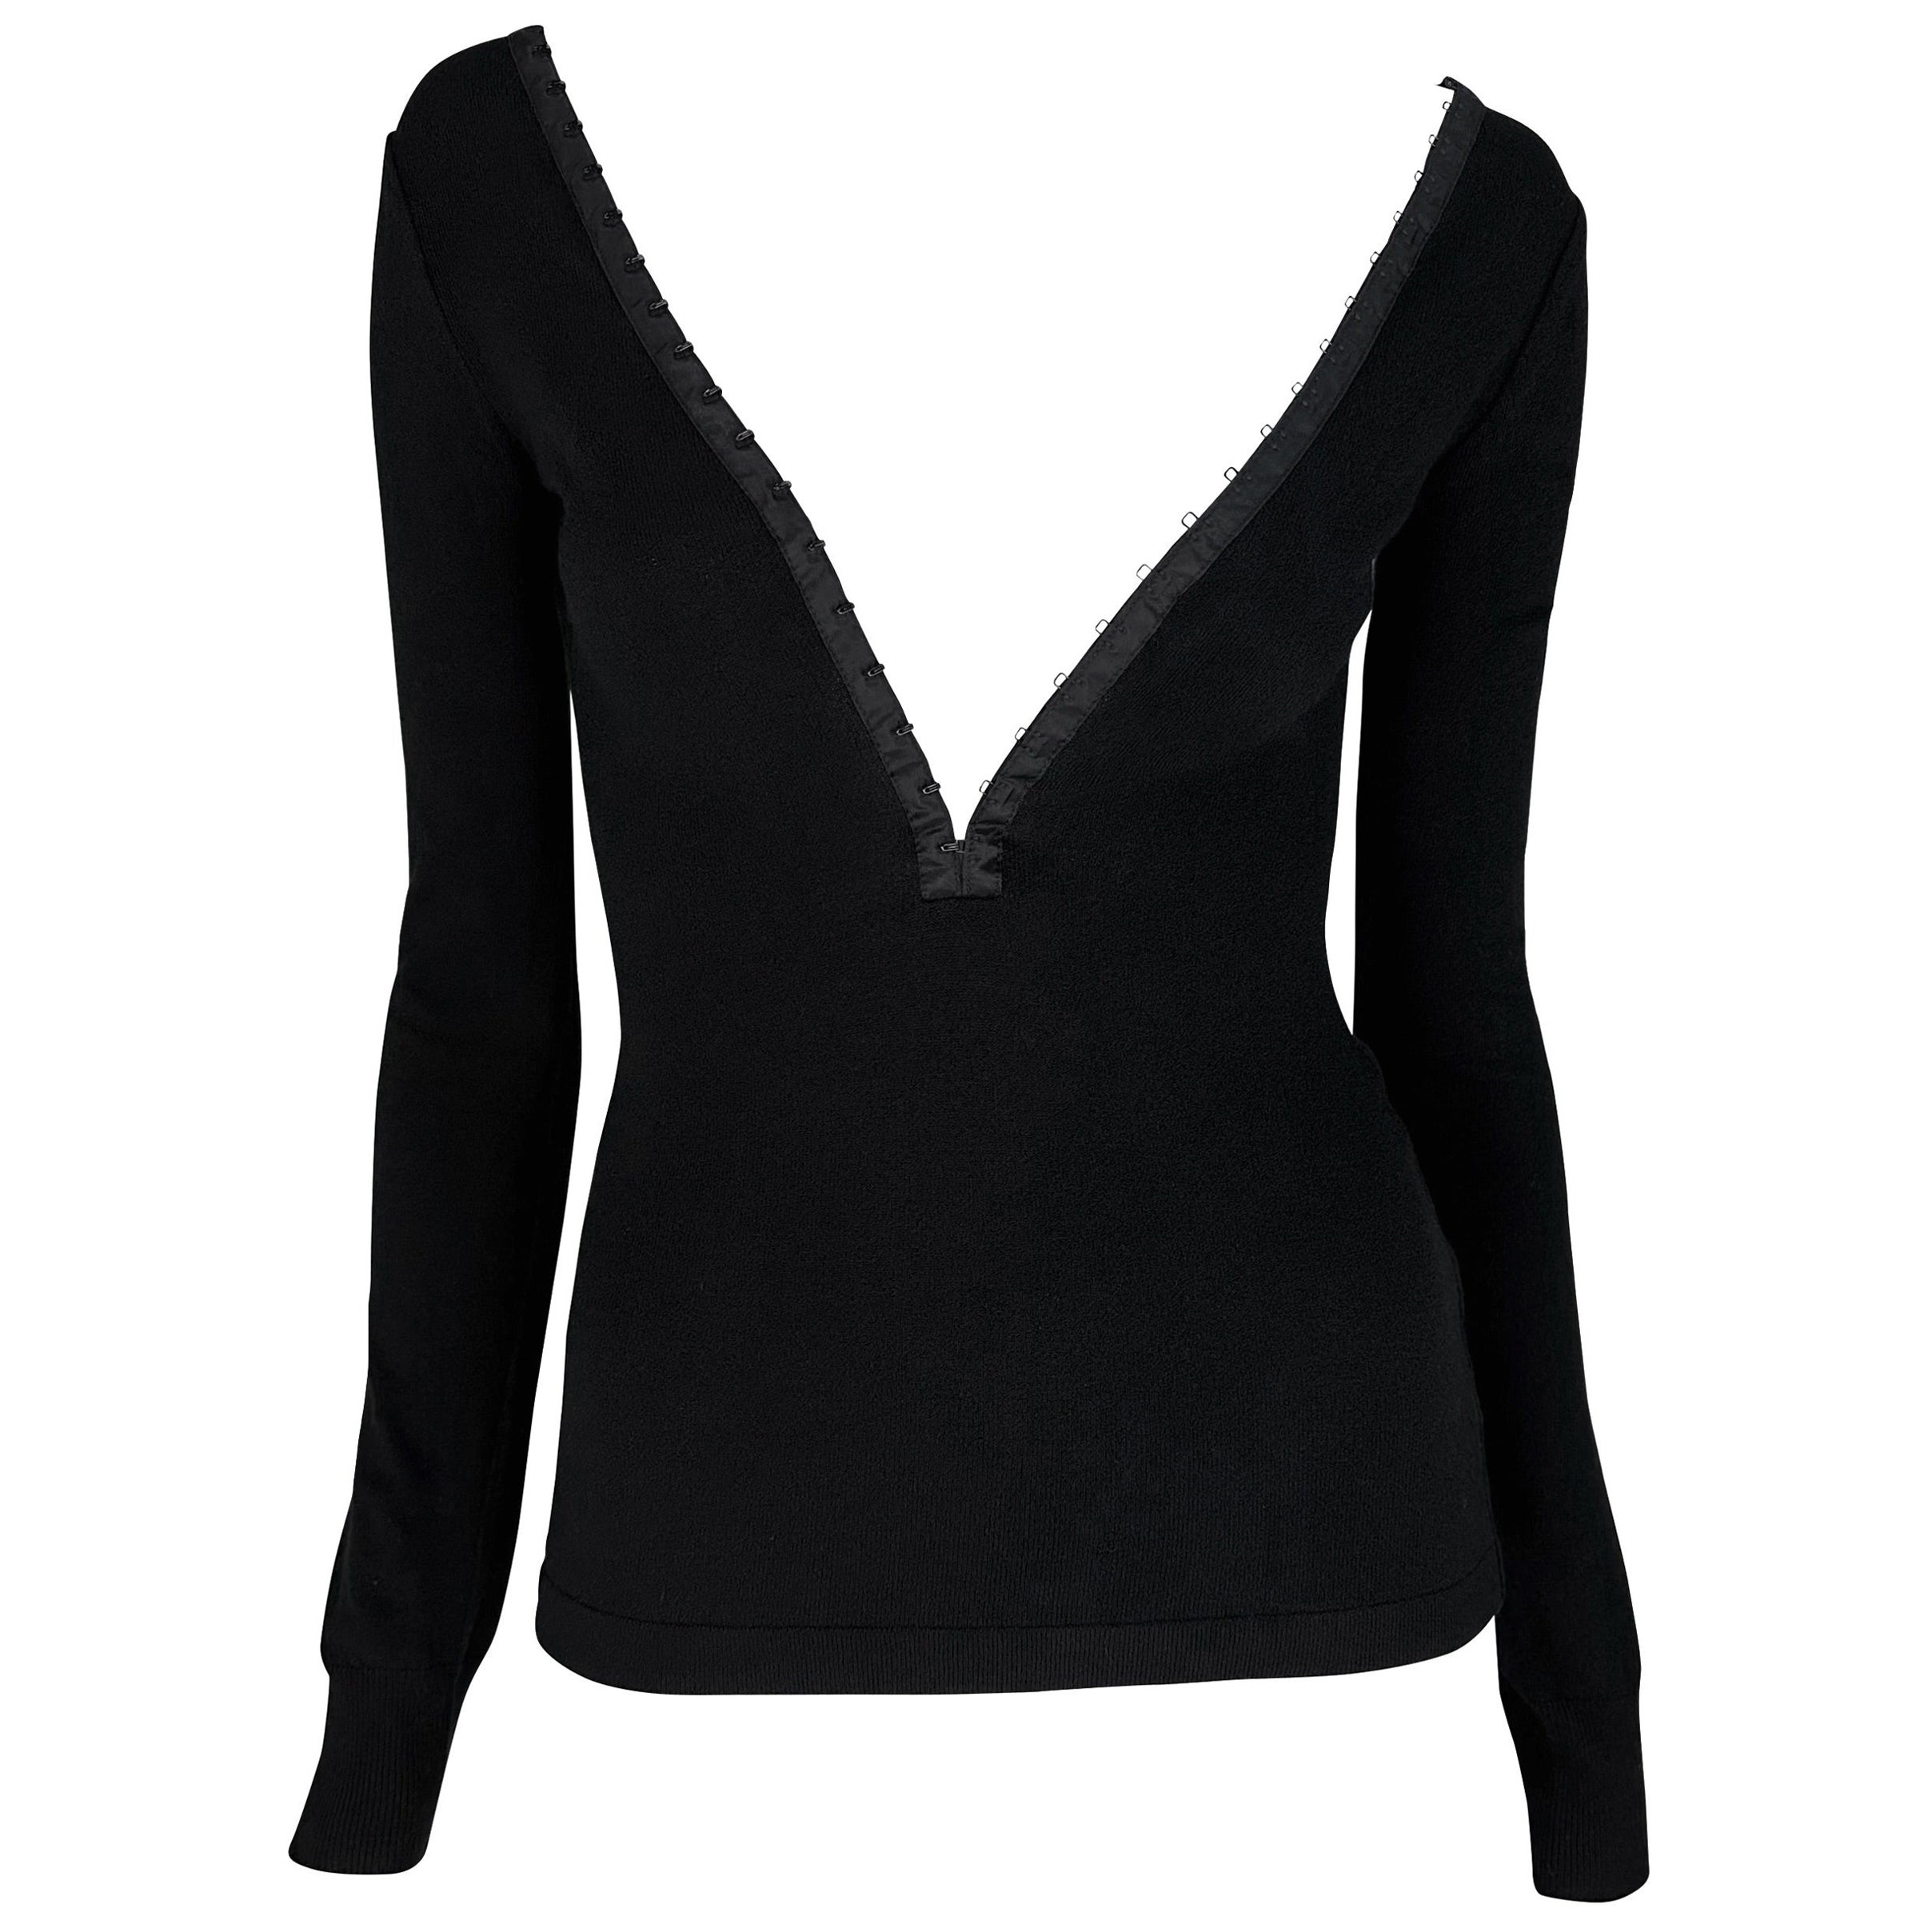 S/S 2003 Dolce & Gabbana Hook & Eye Plunging Black Bodycon Knit Long-Sleeve Top For Sale